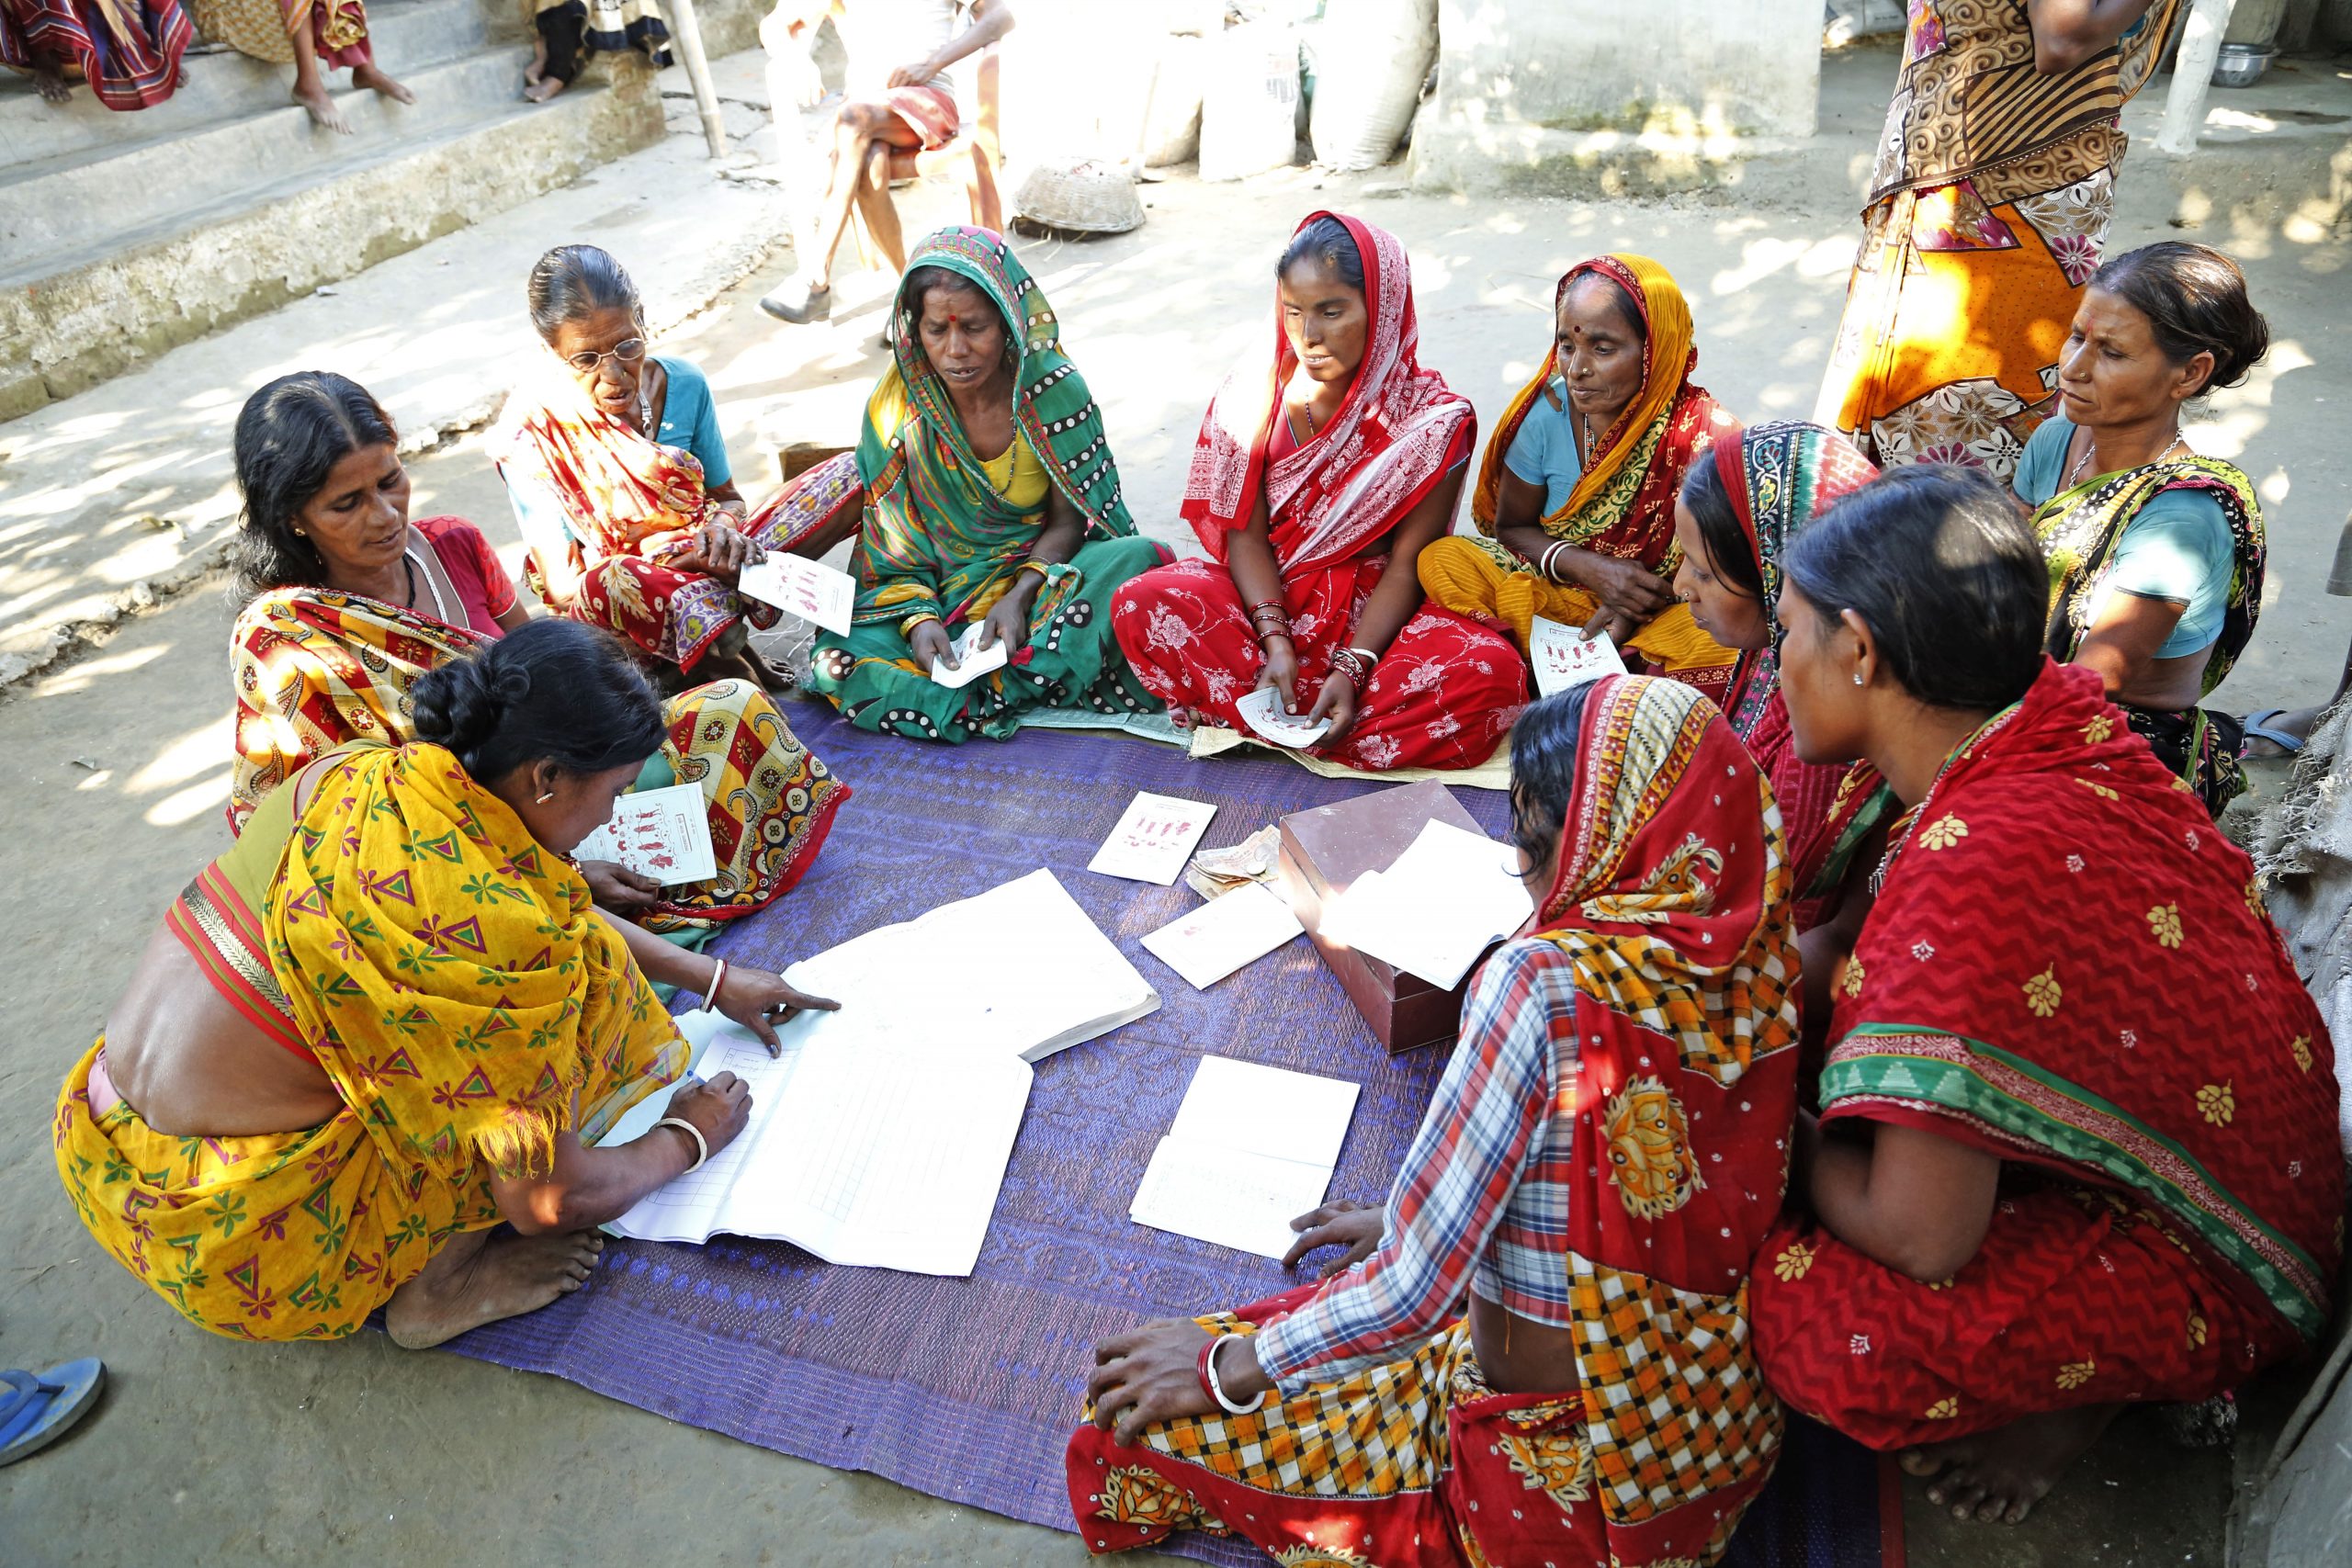 The problem with 'women empowerment' schemes - India Development Review